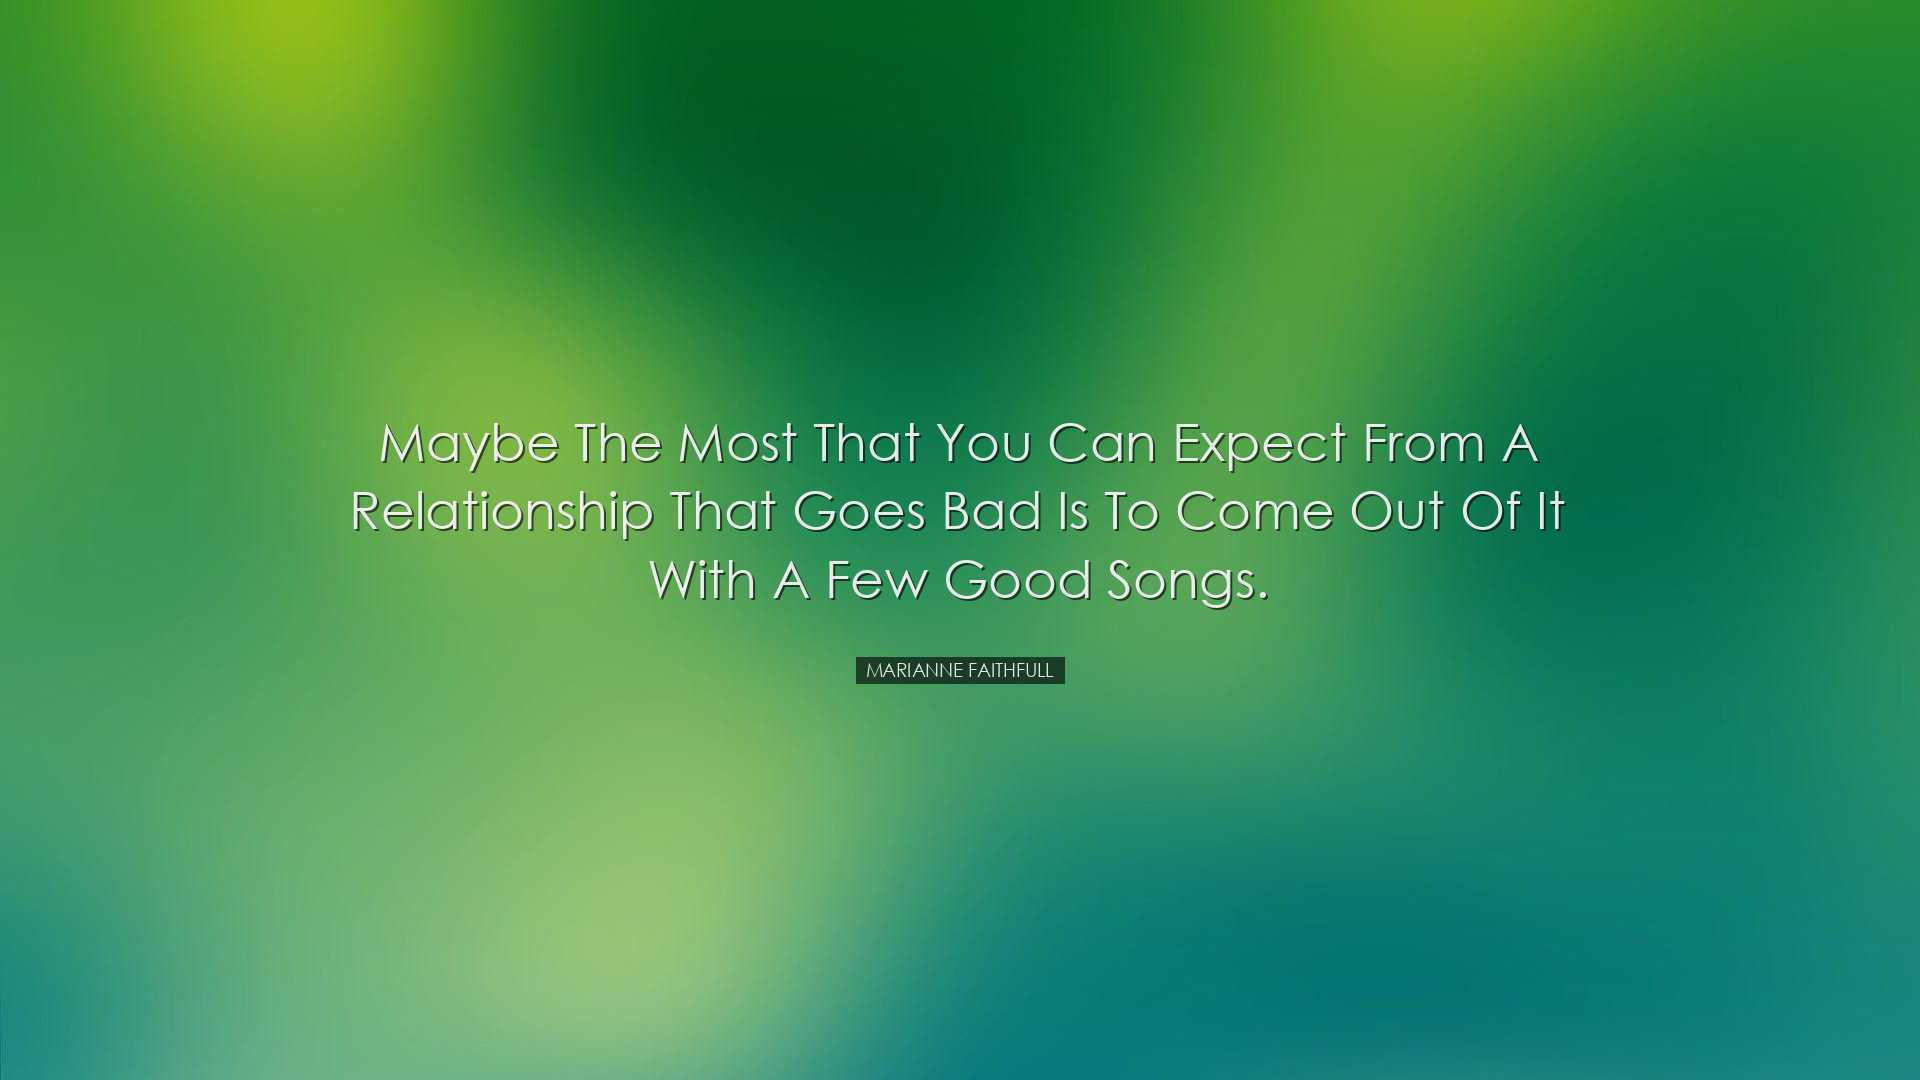 Maybe the most that you can expect from a relationship that goes b